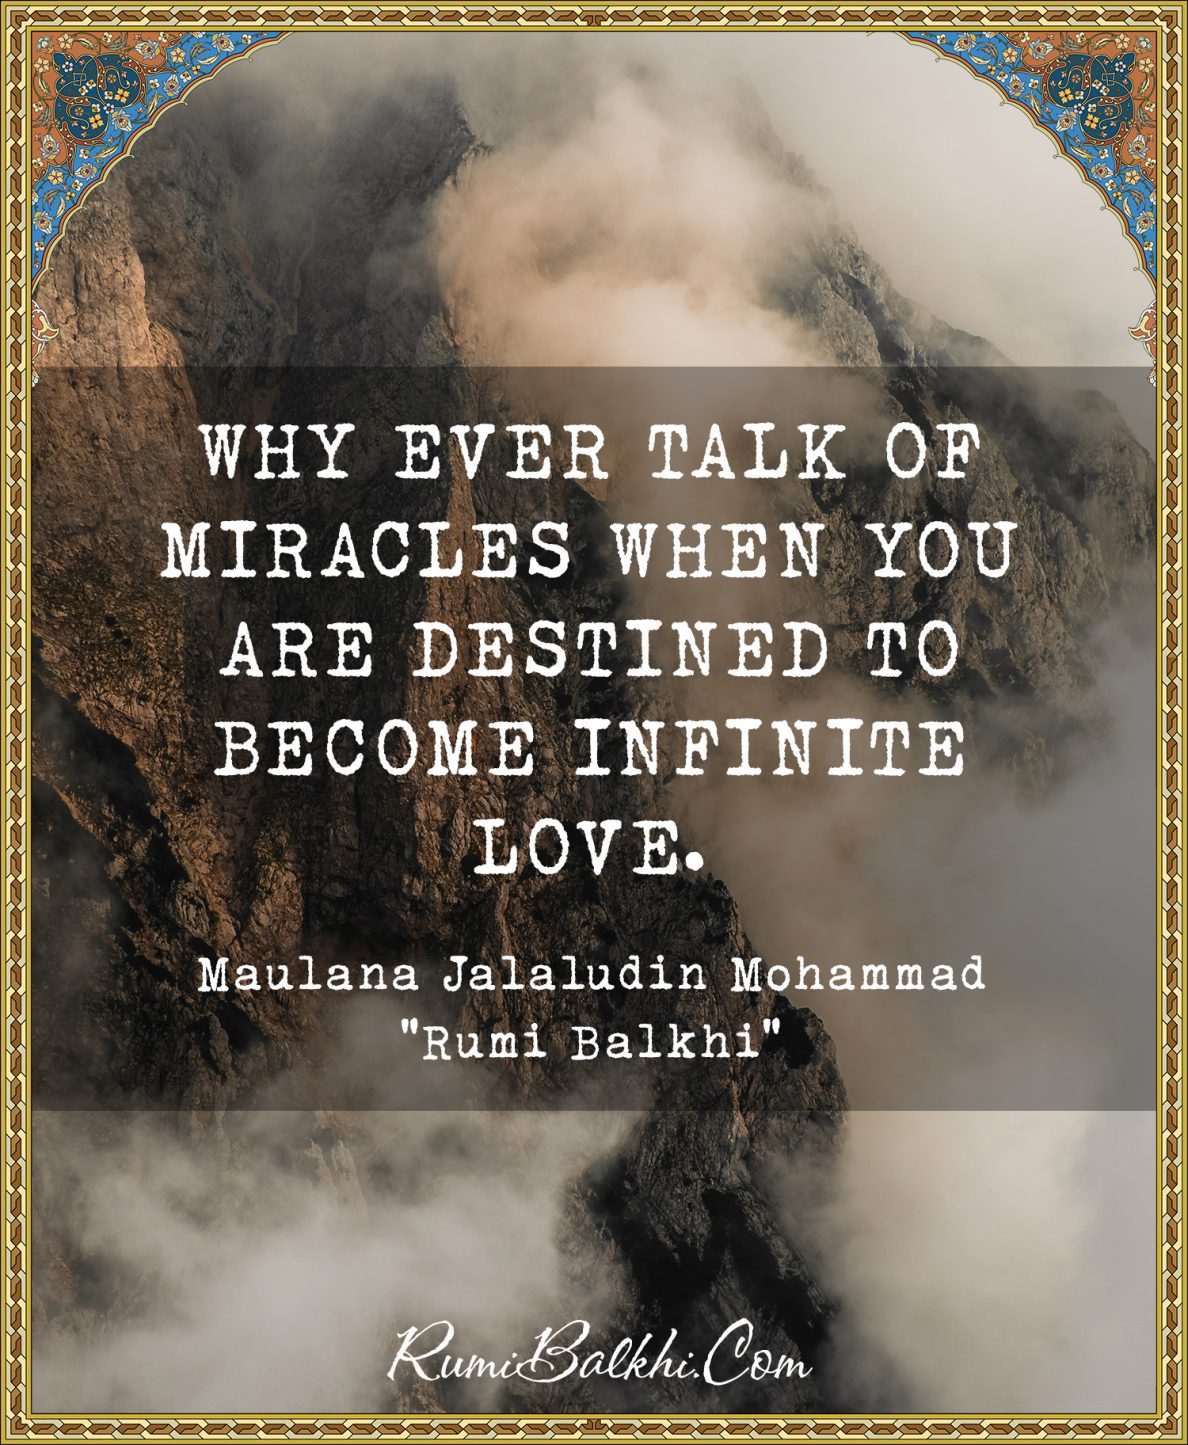 Why ever talk of miracles when you are destined to become infinite love